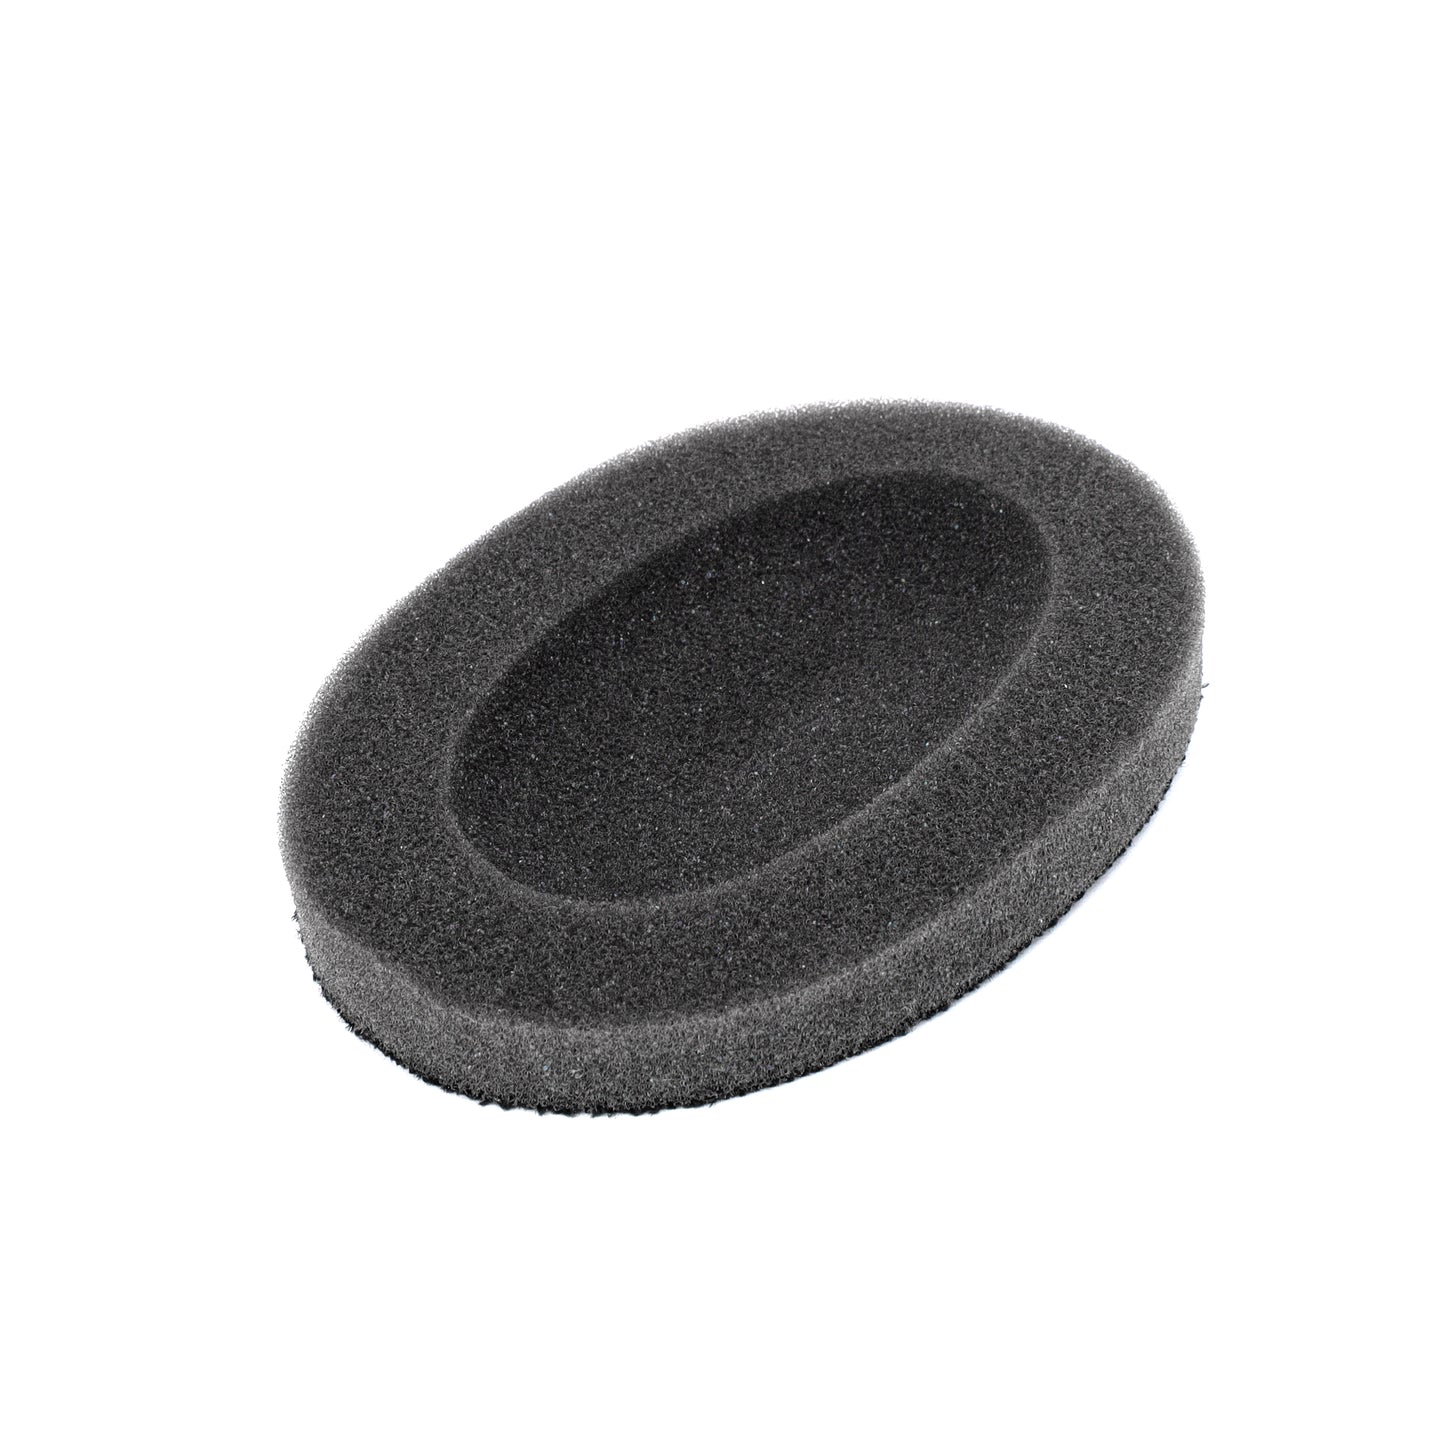 Replacement Ear Foam for Peltor Comtac Headsets